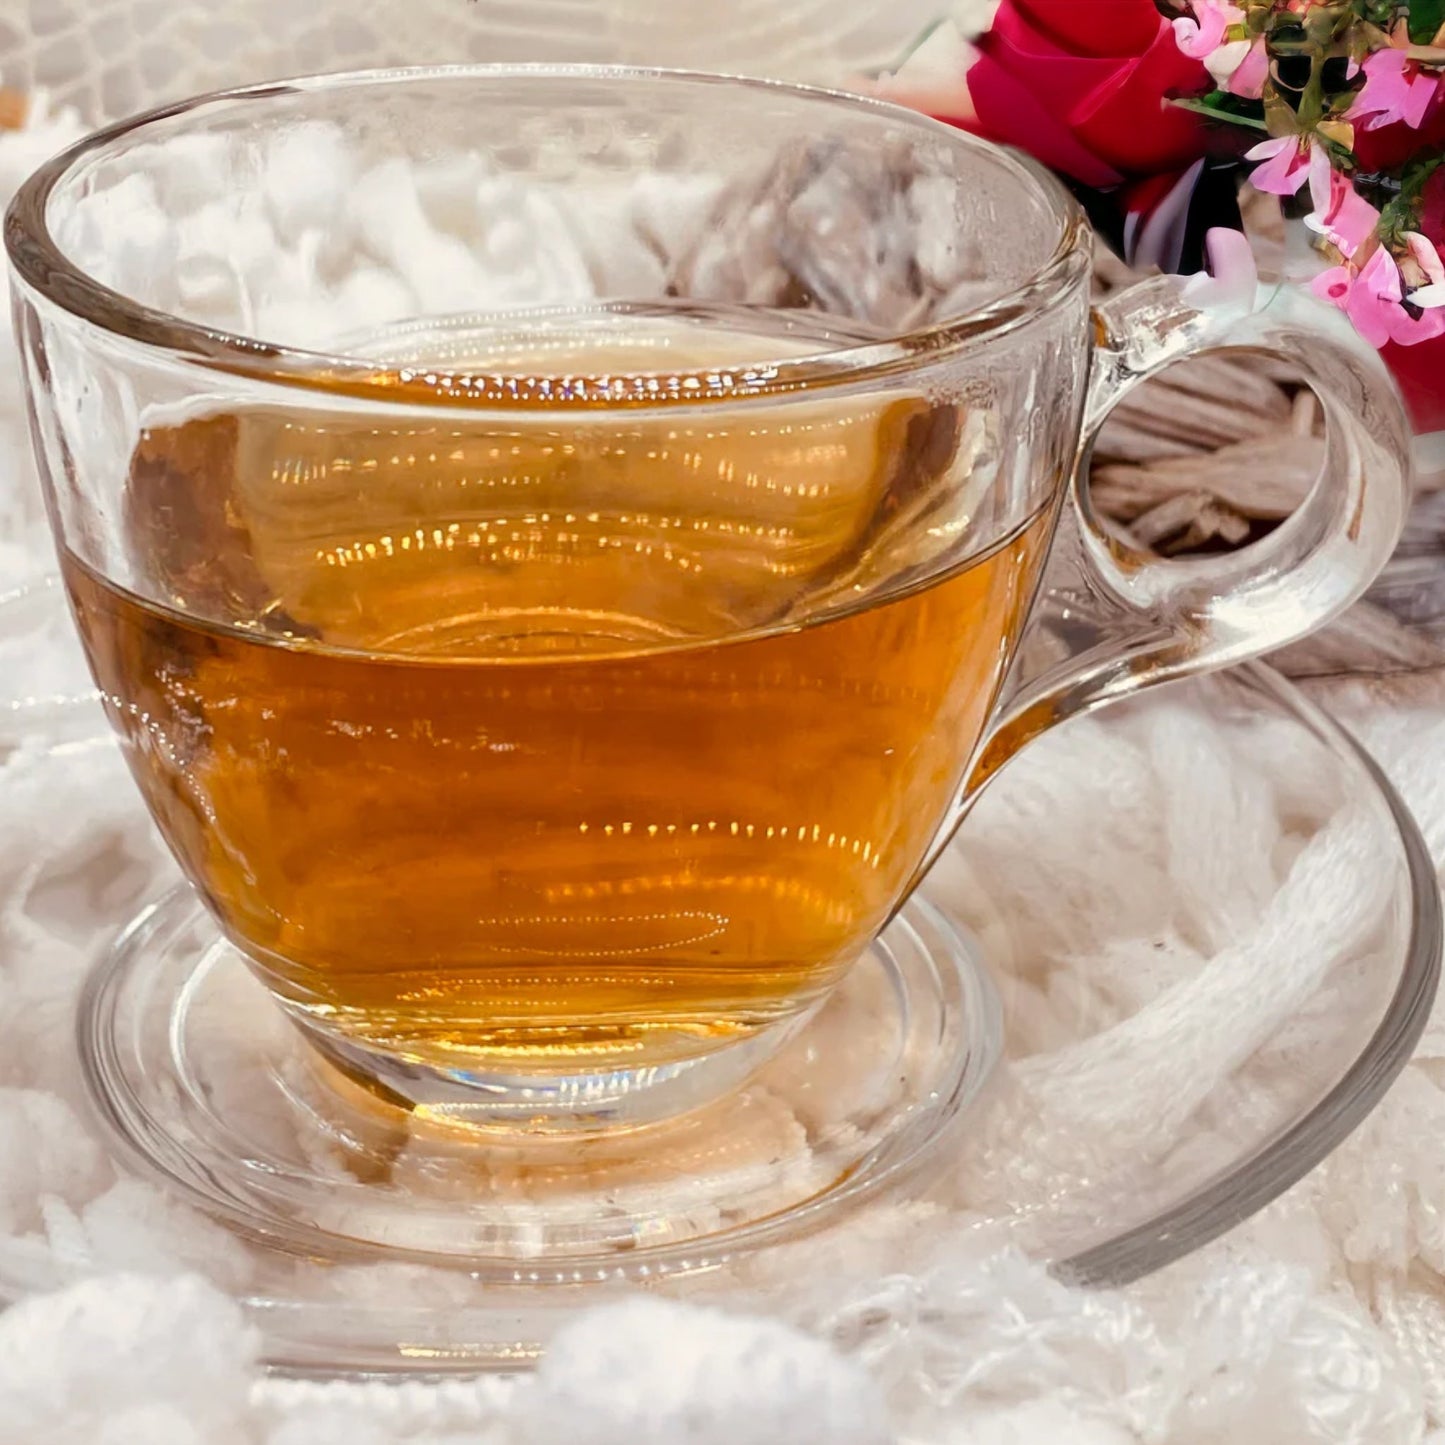 A freshly brewed cup of Happy Morning tea is in a glass cup of beautiful of gold amber ted colour.